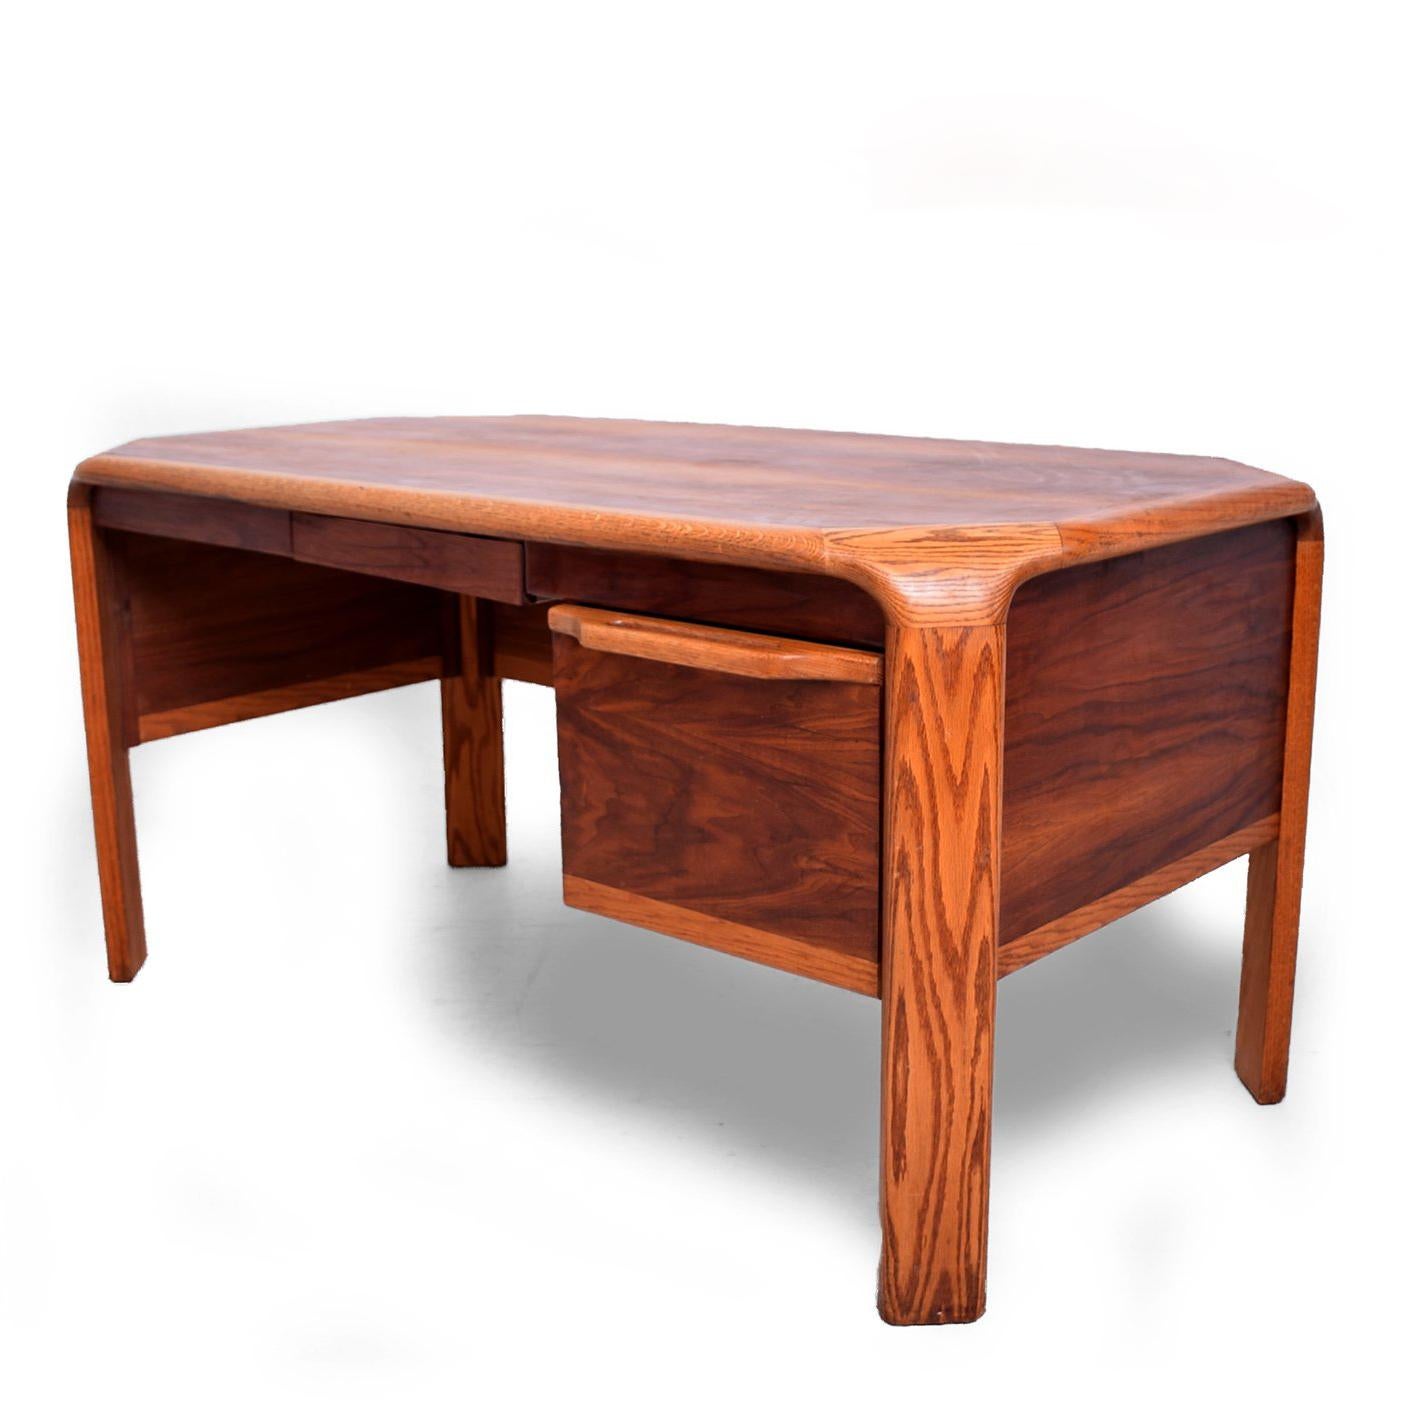 For your consideration a Mid-Century Modern desk attributed to Lou Hodges.

Walnut with oak wood. Features one small pull-out drawer and a large file drawer. 

Unmarked, USA, circa late 1960s. California modern.

Measures: 29 1/4